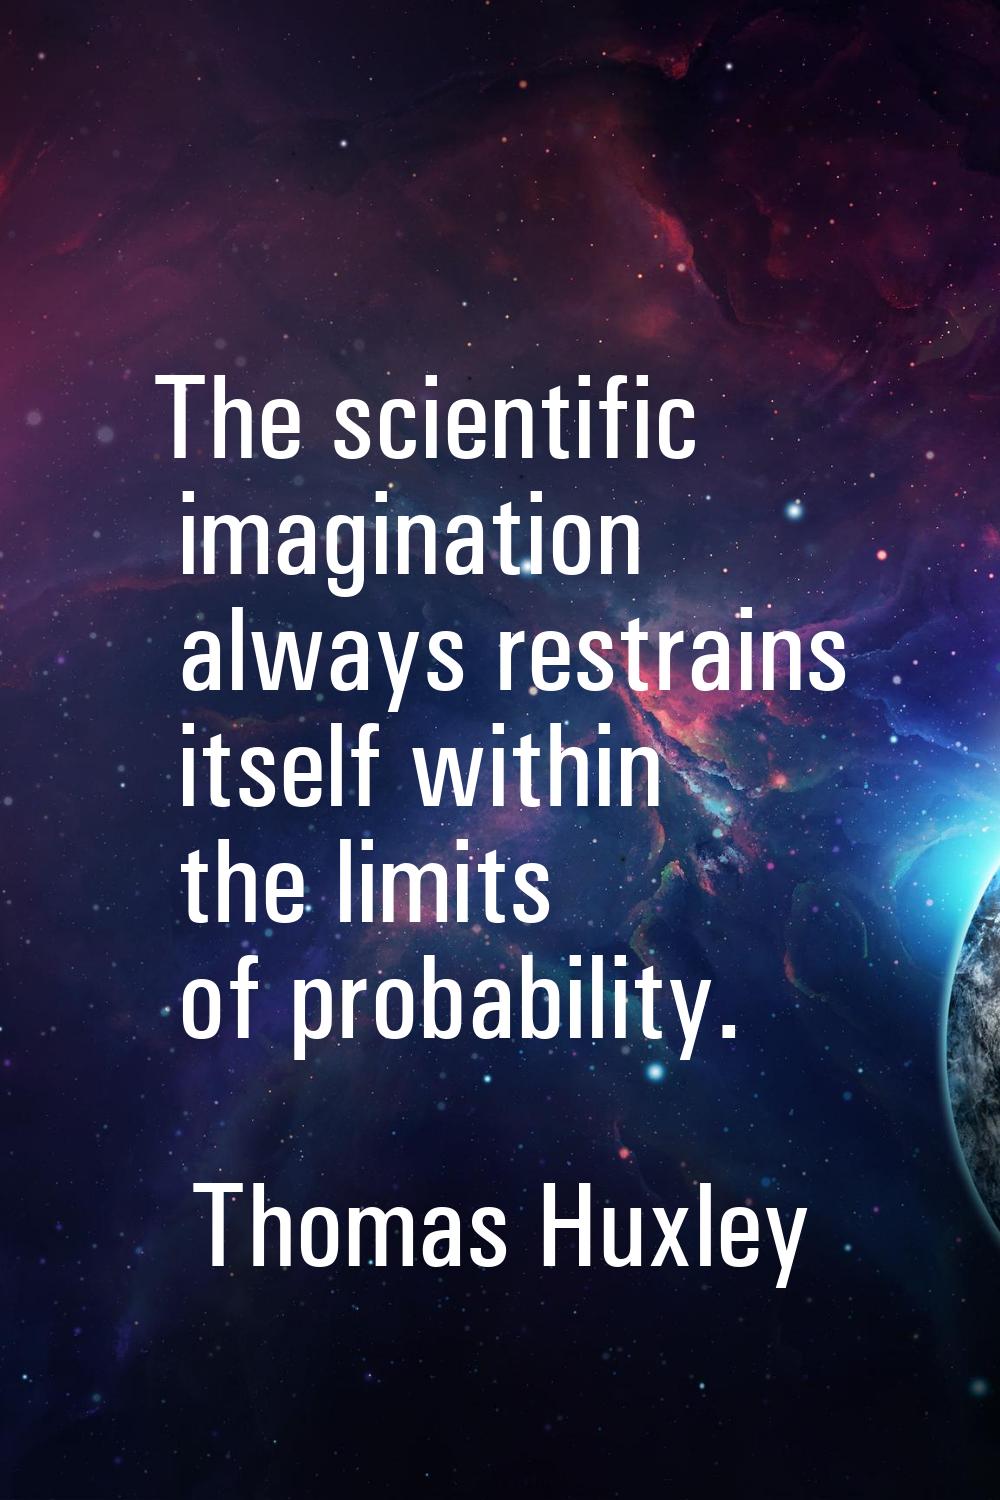 The scientific imagination always restrains itself within the limits of probability.